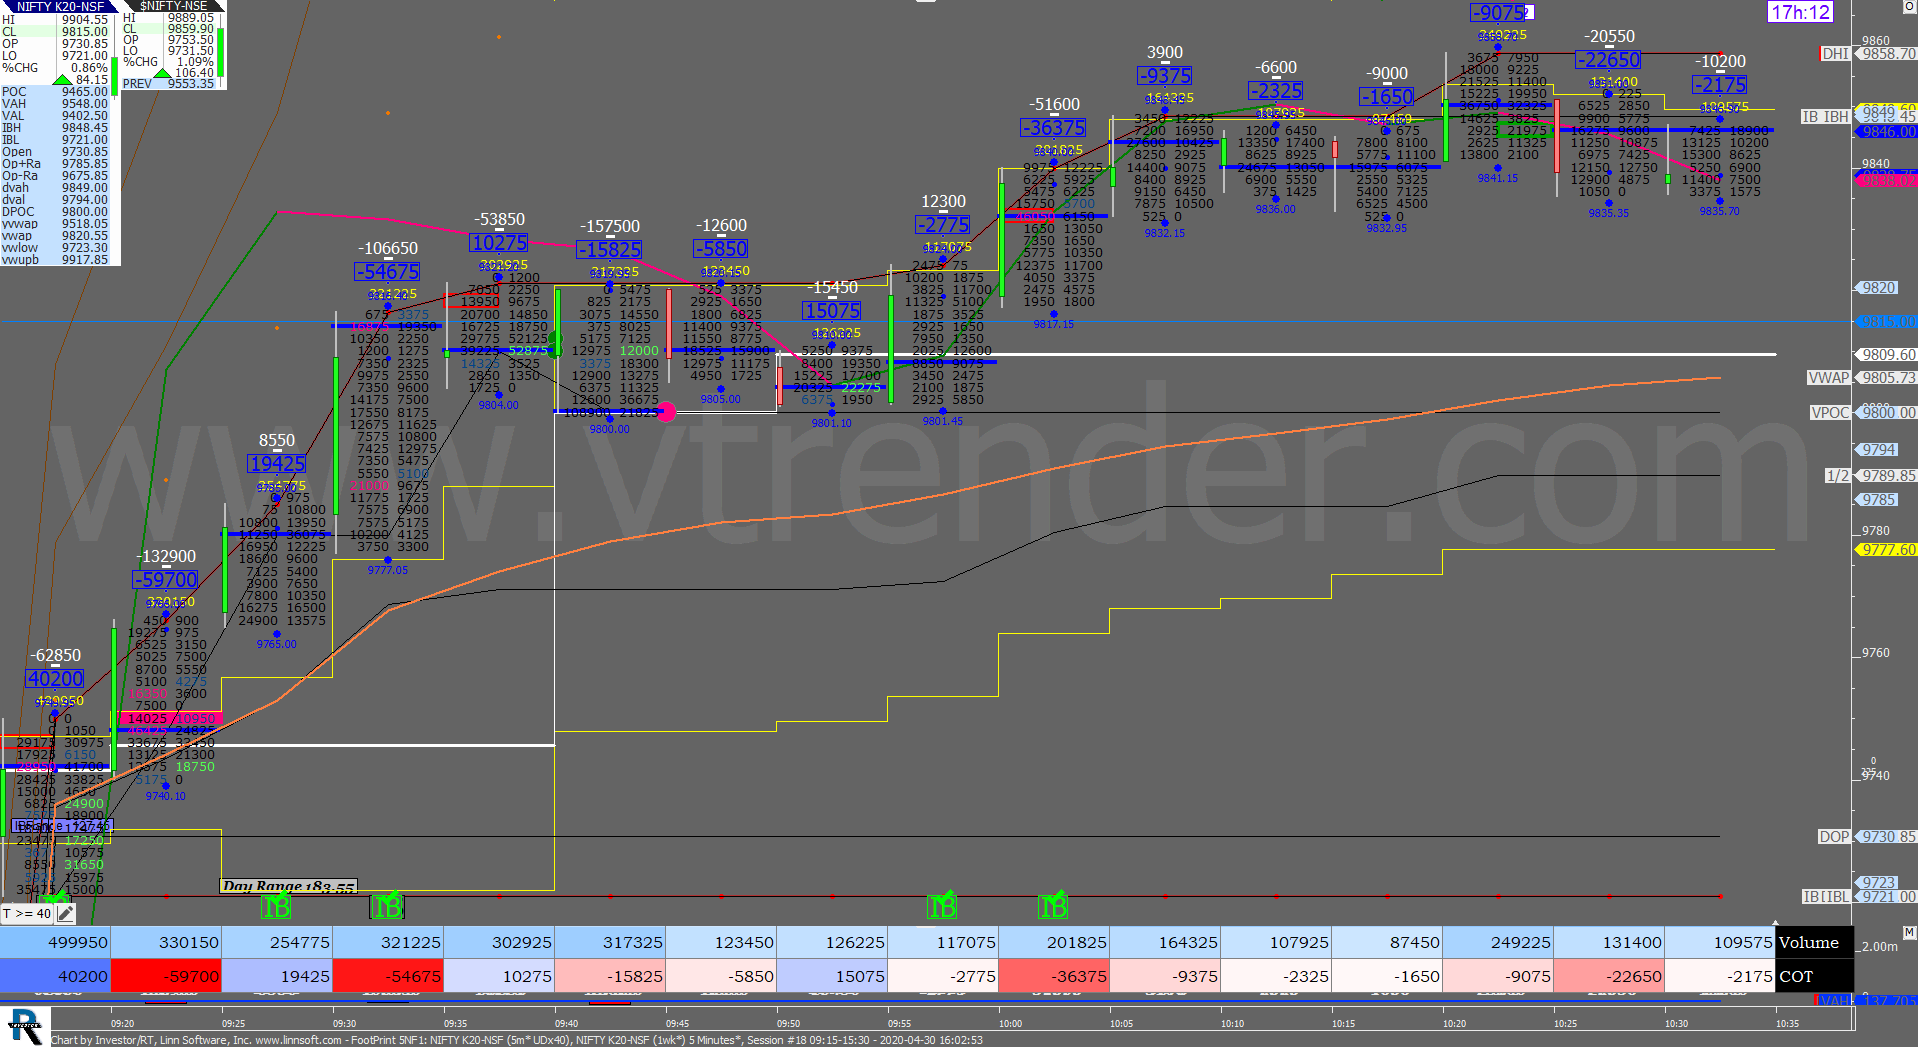 1 34 Order Flow Charts Dated 30Th Apr 2020 (5 Mins) Banknifty Futures, Day Trading, Intraday Trading, Intraday Trading Strategies, Nifty Futures, Order Flow Analysis, Support And Resistance, Trading Strategies, Volume Profile Trading